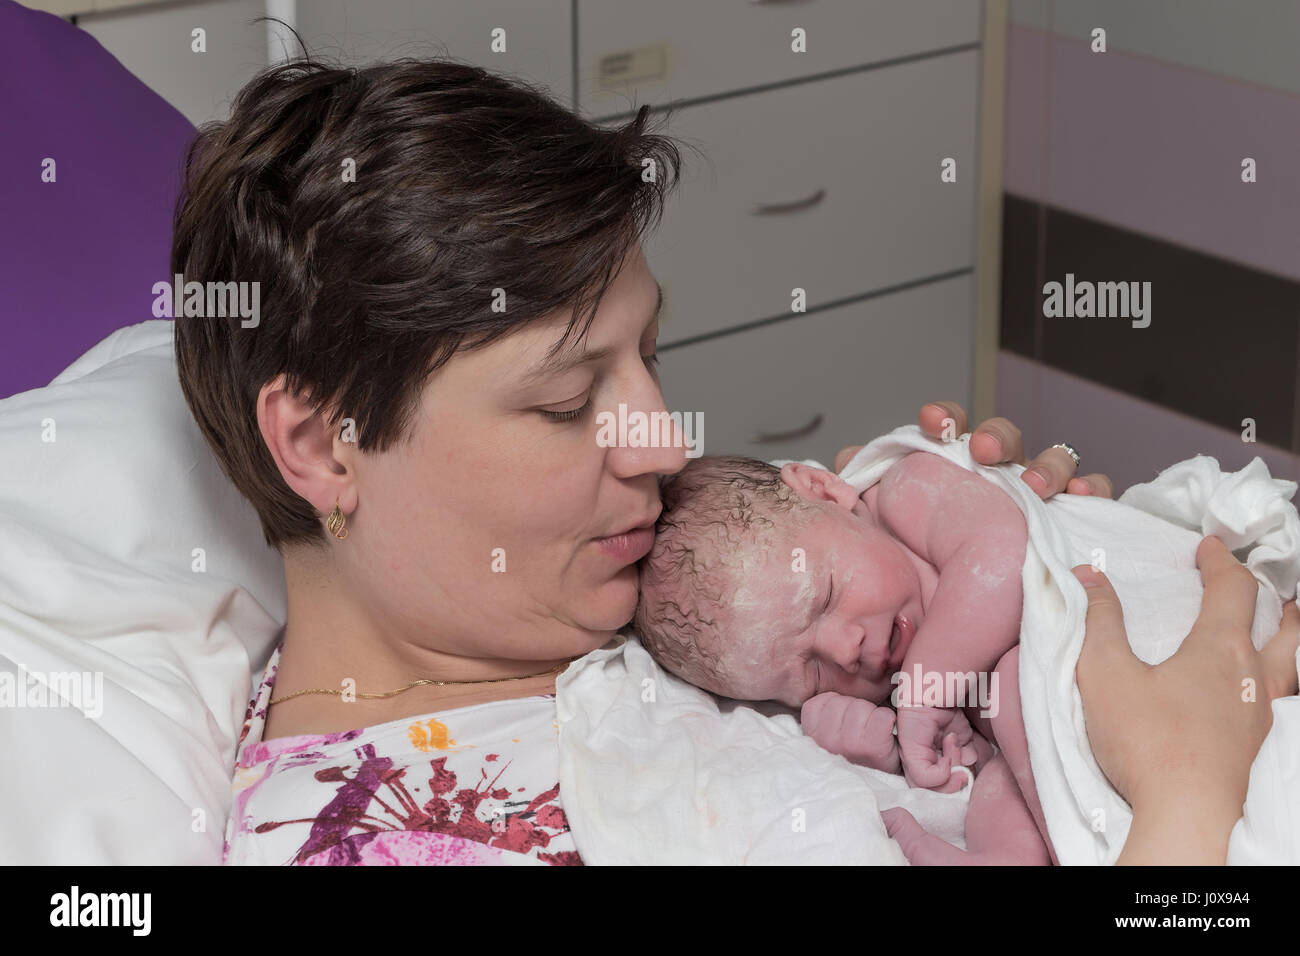 Happy mature woman, mother, with newborn baby immediately after delivery. Stock Photo